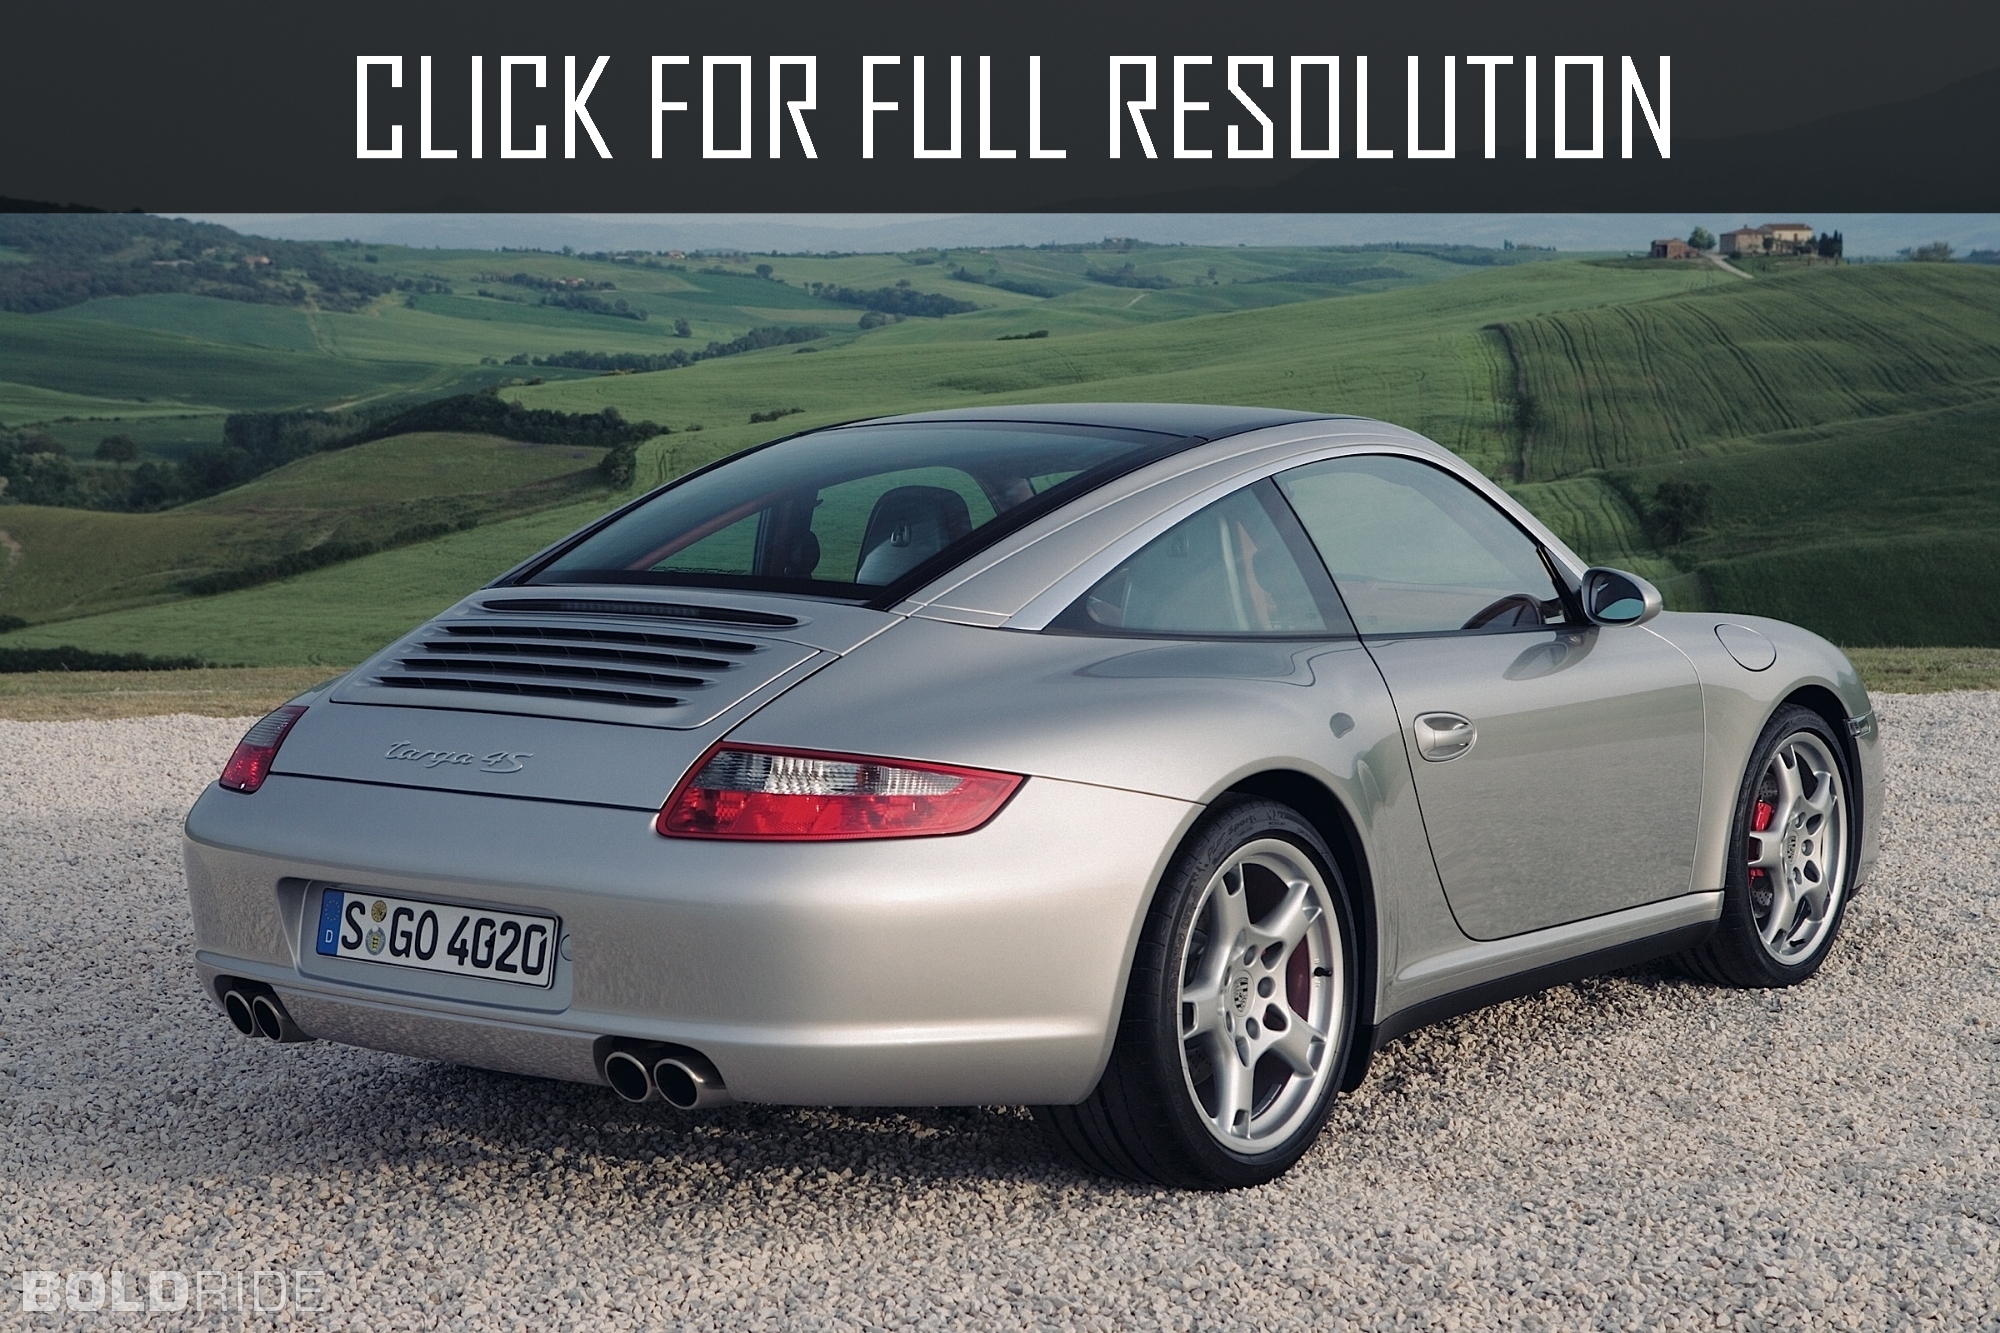 2007 Porsche 911 news, reviews, msrp, ratings with